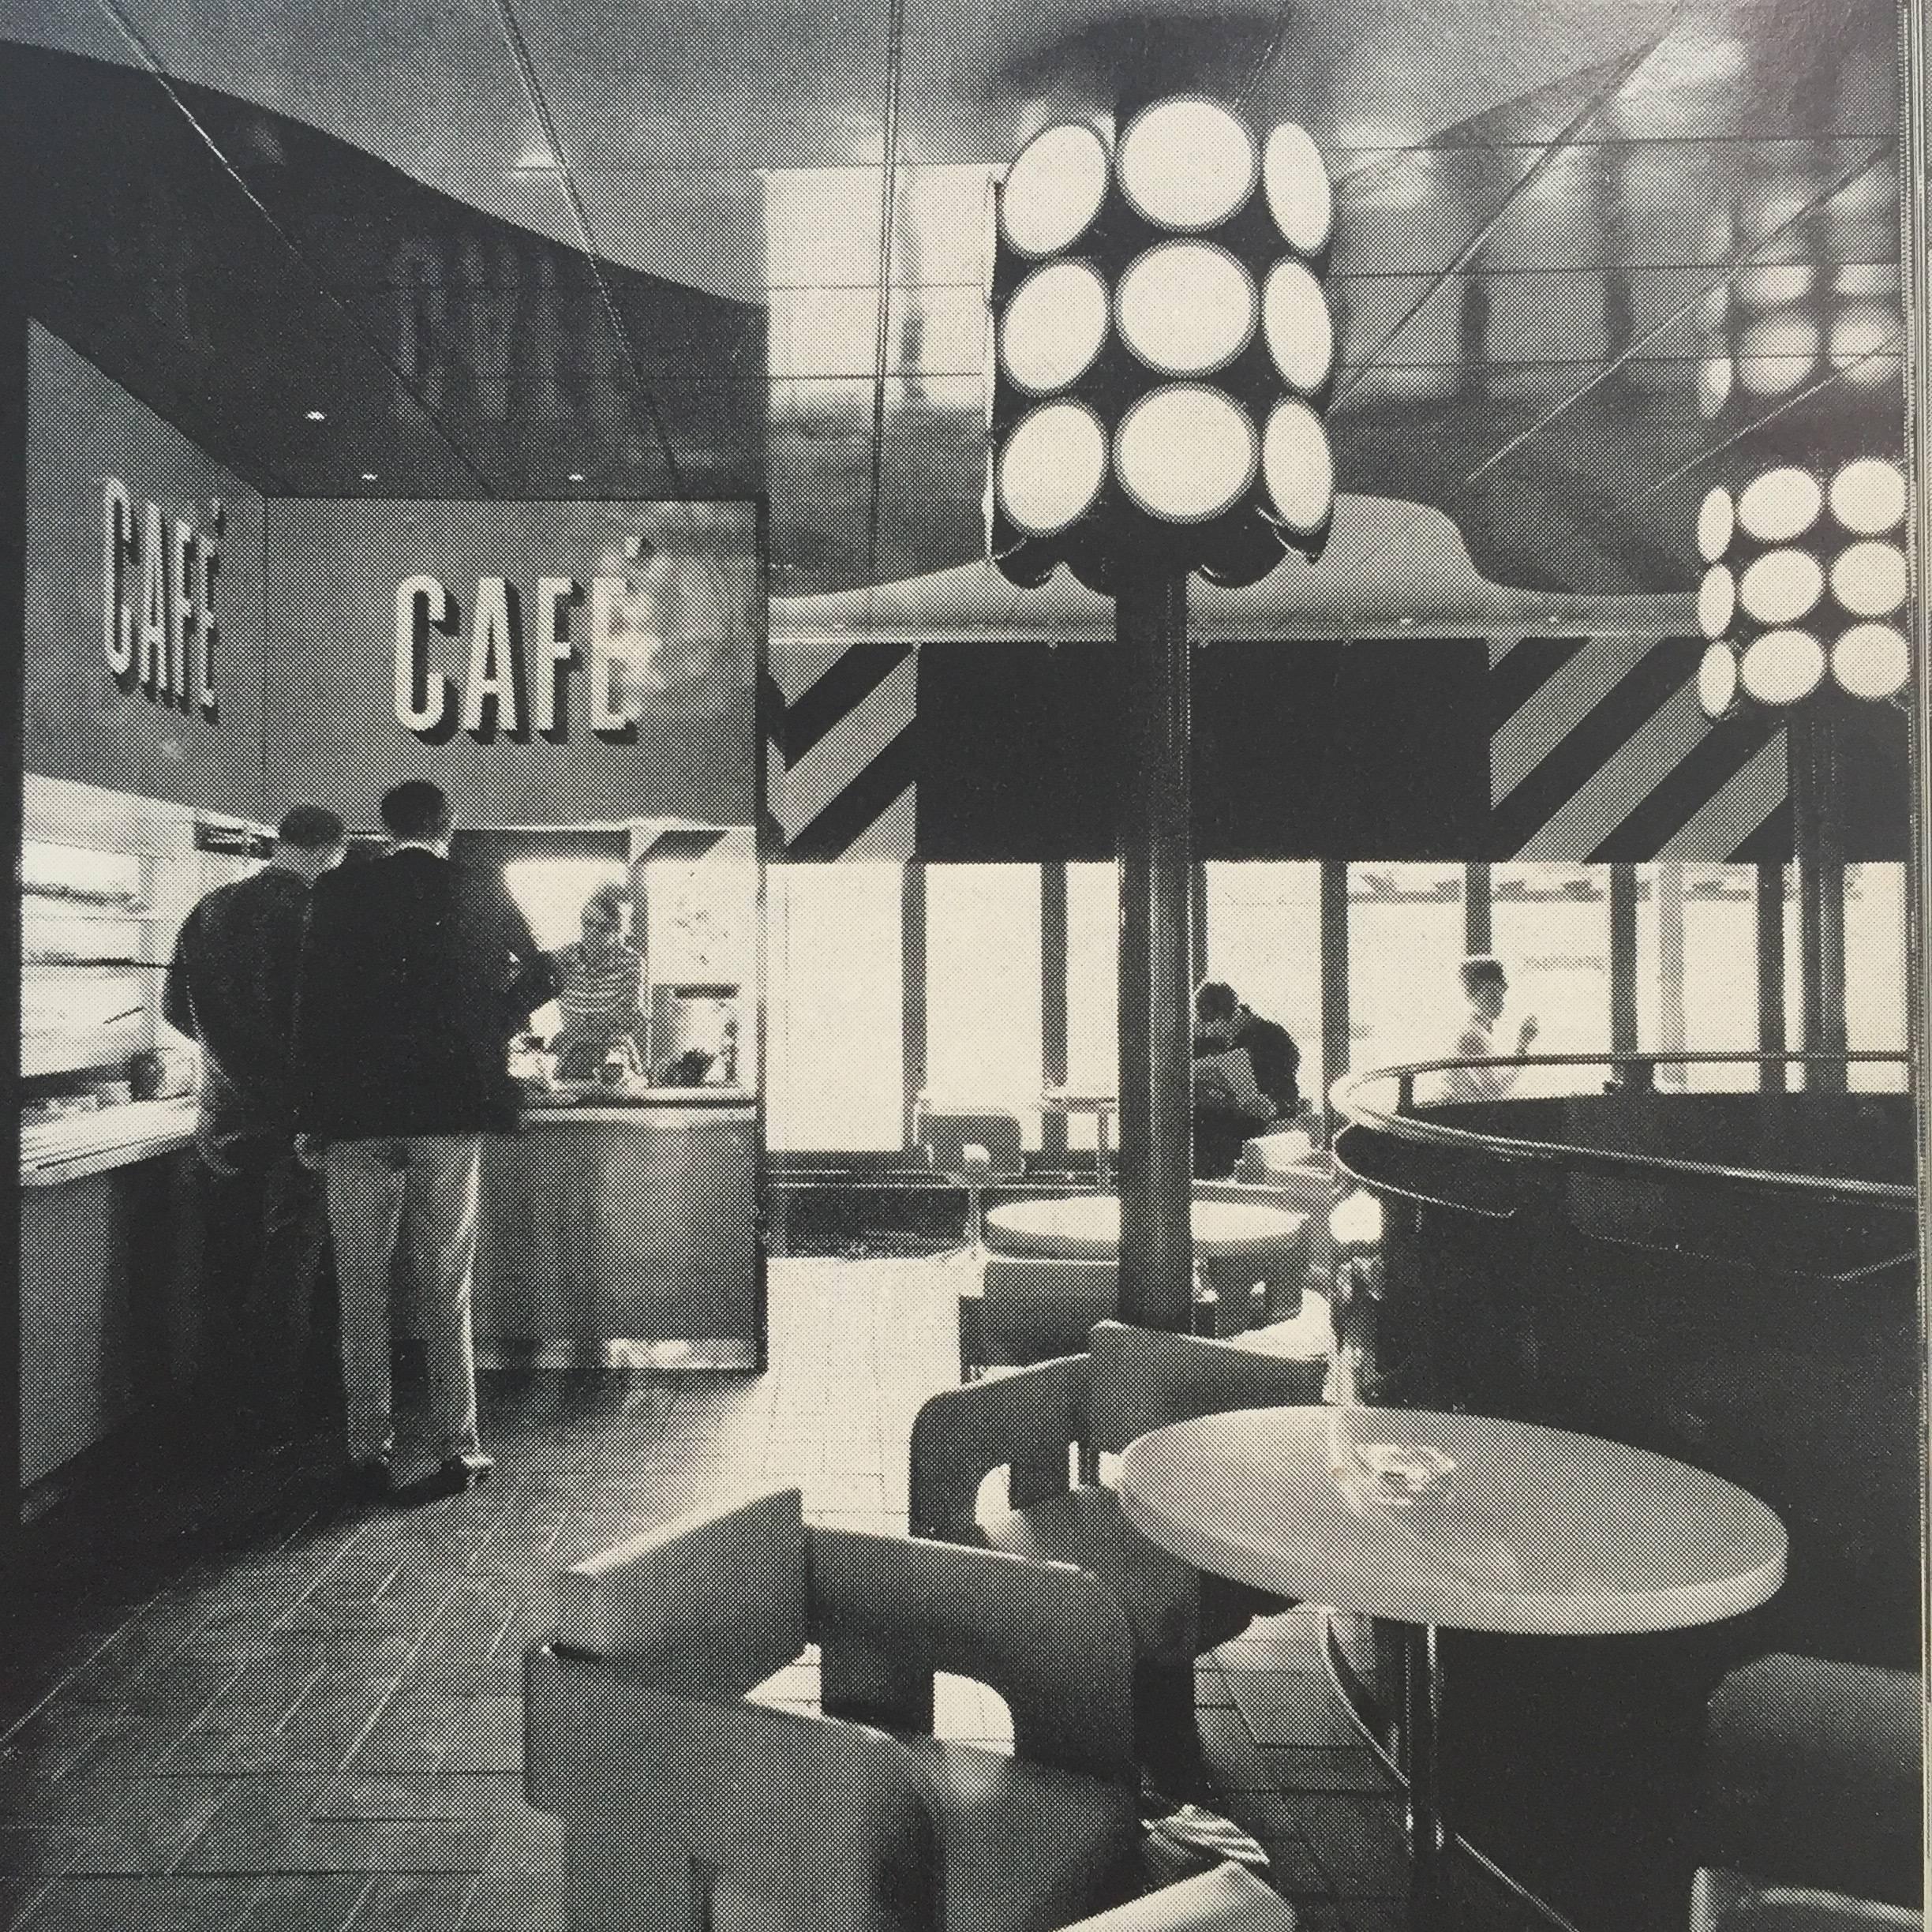 First edition, published by Verlagsanstalt Alexander Koch GmBH & Leonard Hill Books, 1971.

Restaurant architecture and design: An International survey of eating places.

This beautiful book presents the utopian modernist design of the